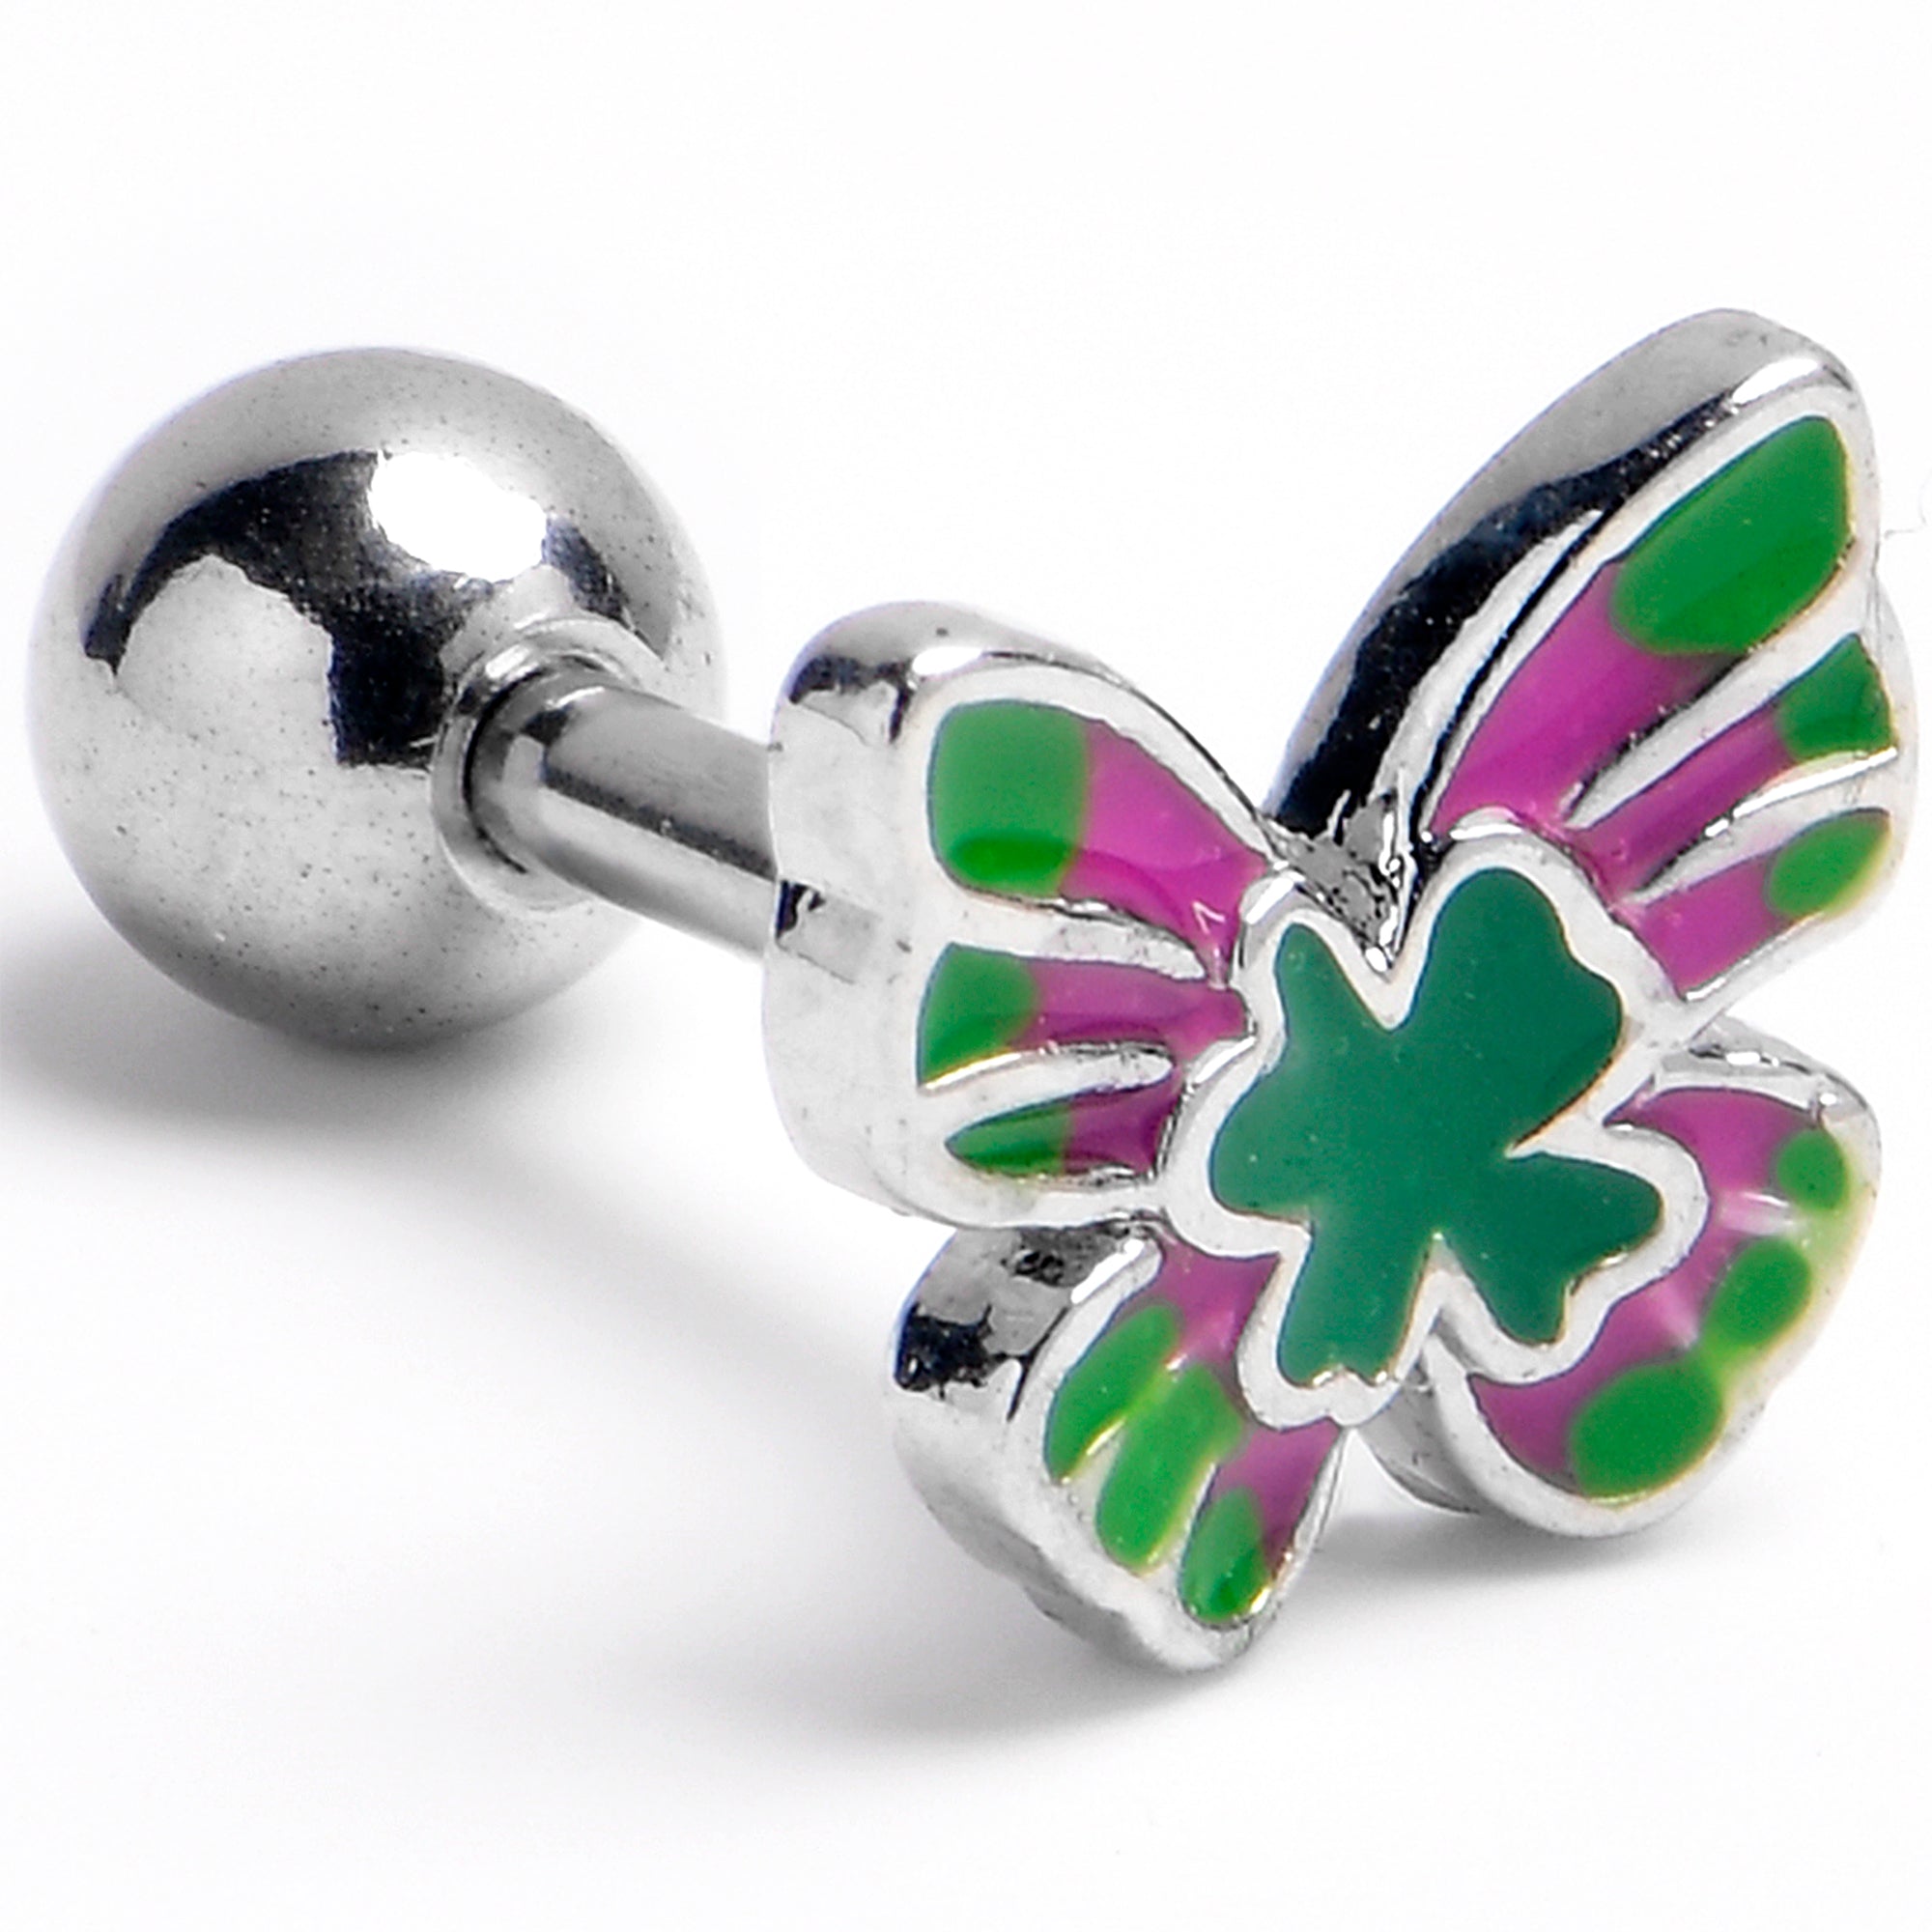 16 Gauge 1/4 Striped Vibrant Grace Butterfly Cartilage Tragus Earring